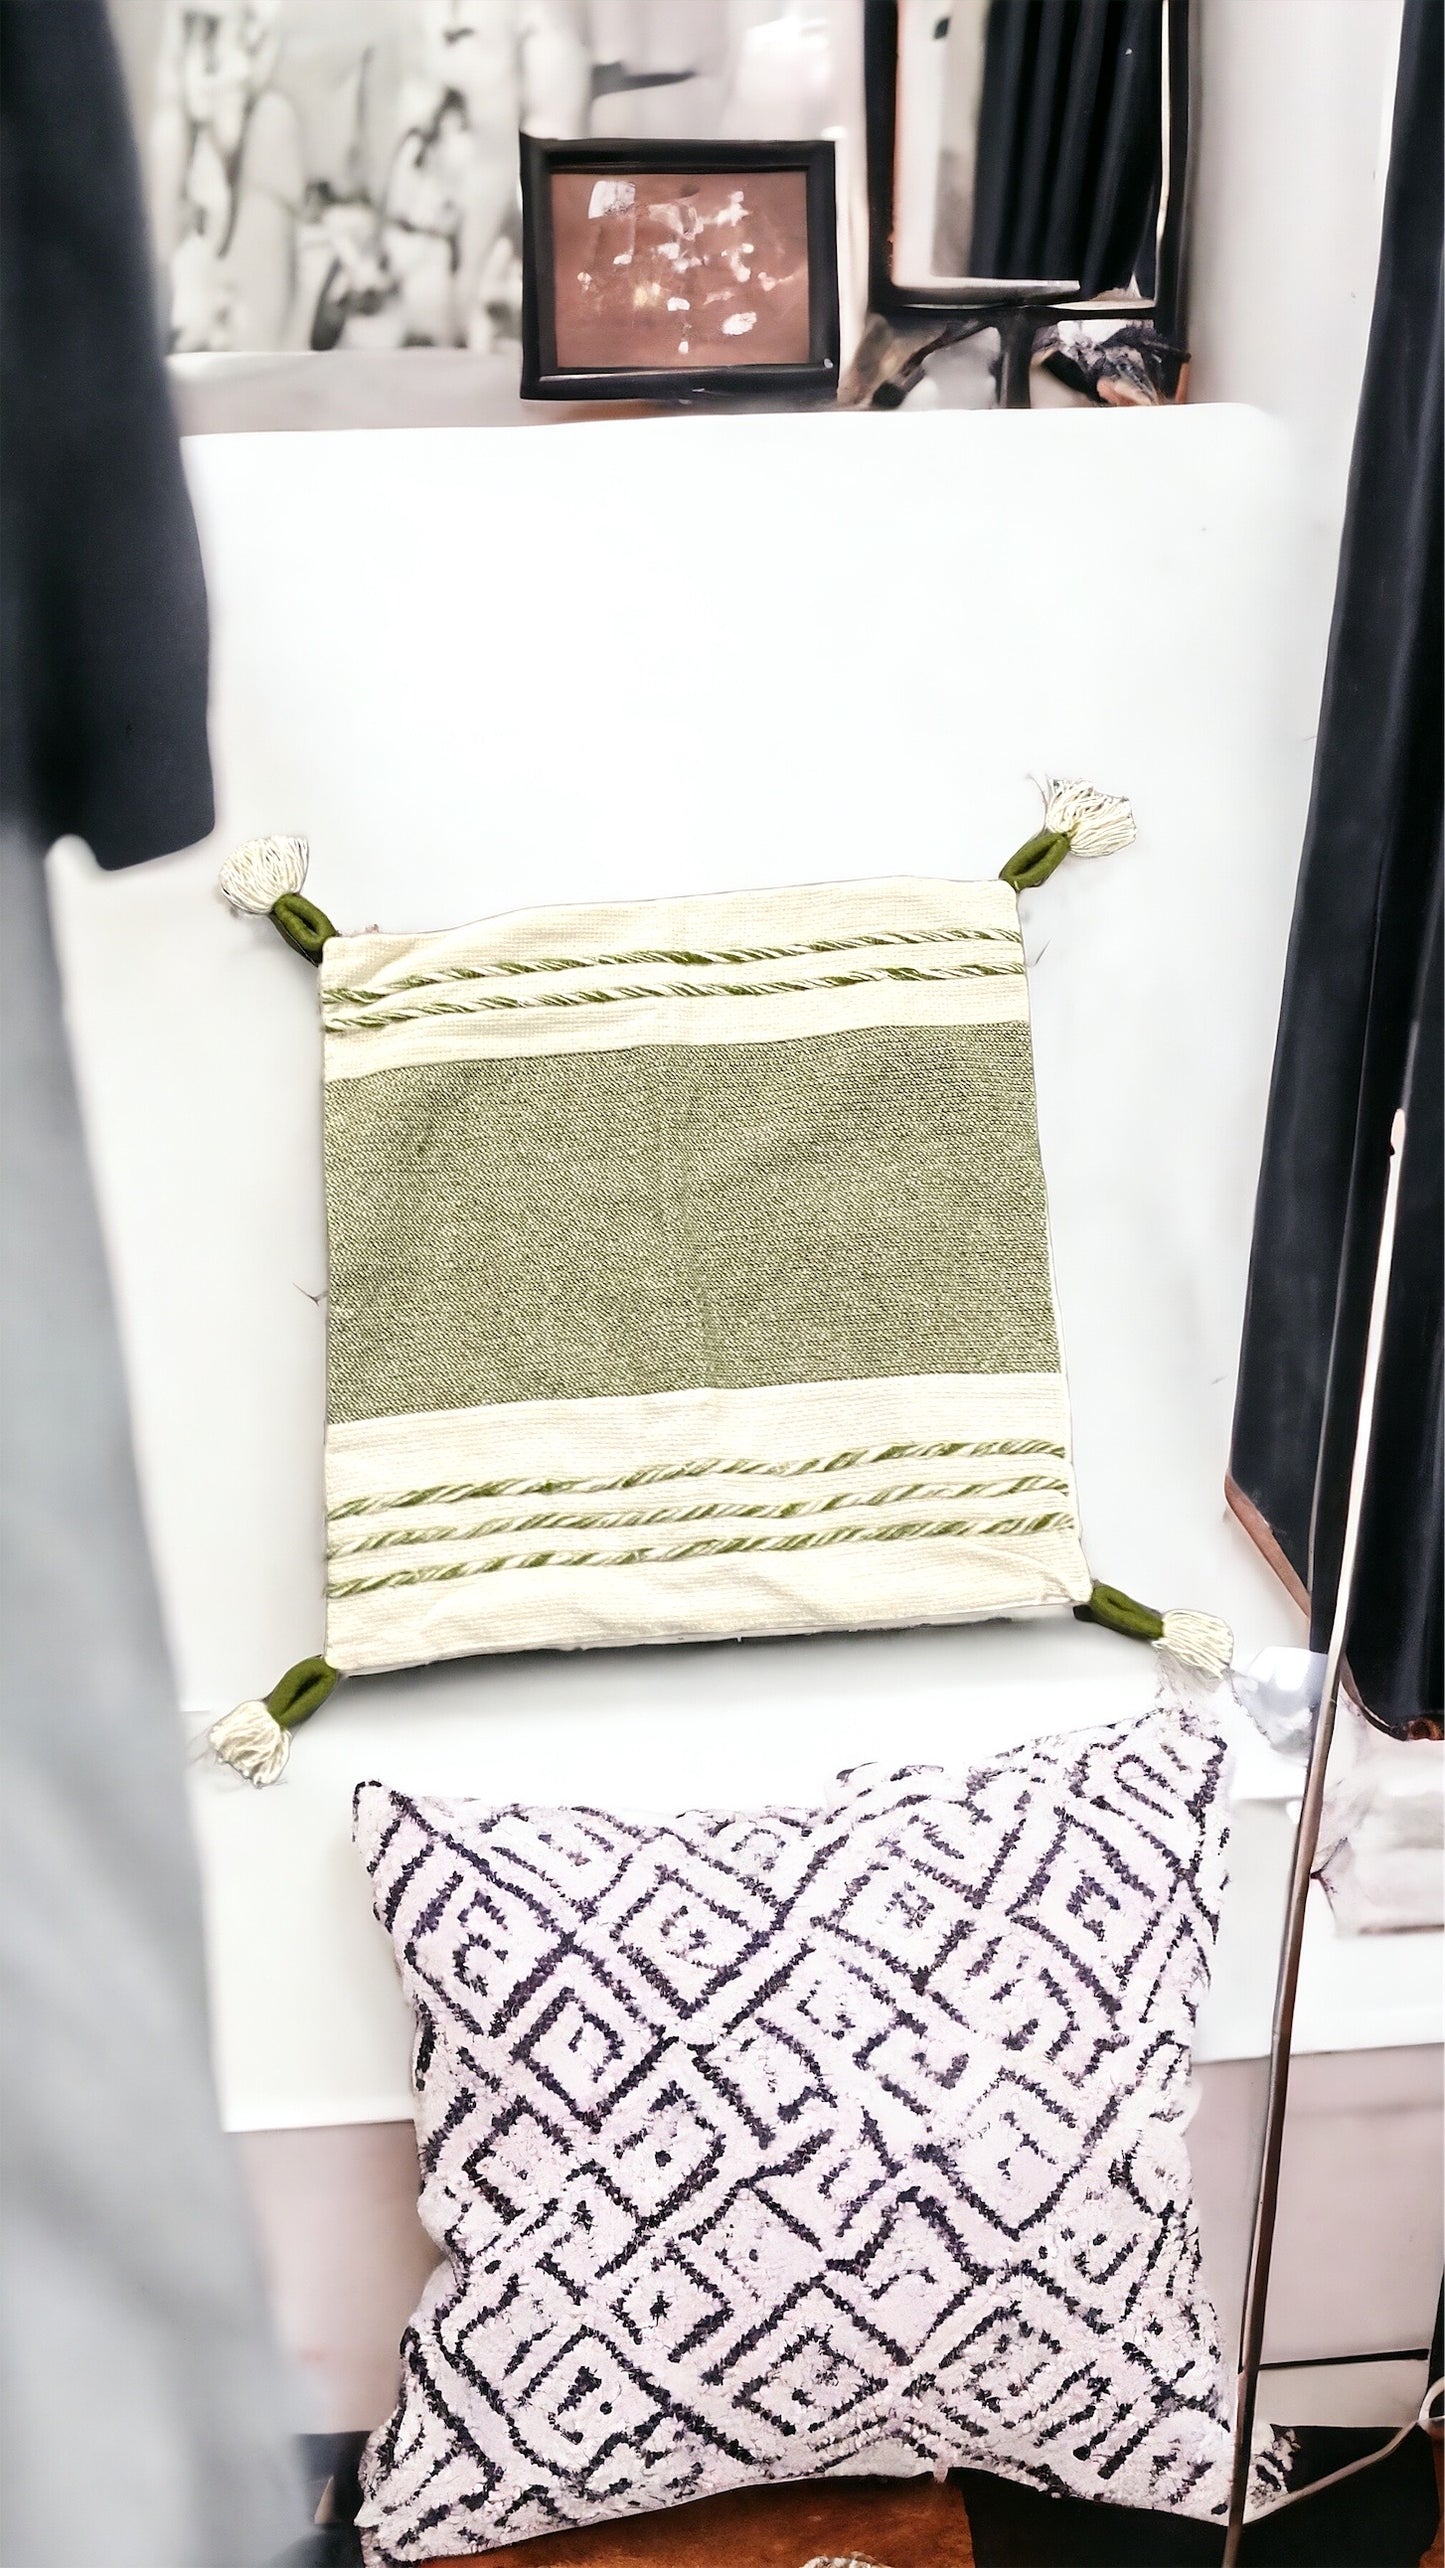 Green & Natural White Striped Tasseled Linen Textured, 2 Pillow Covers 20 X 20